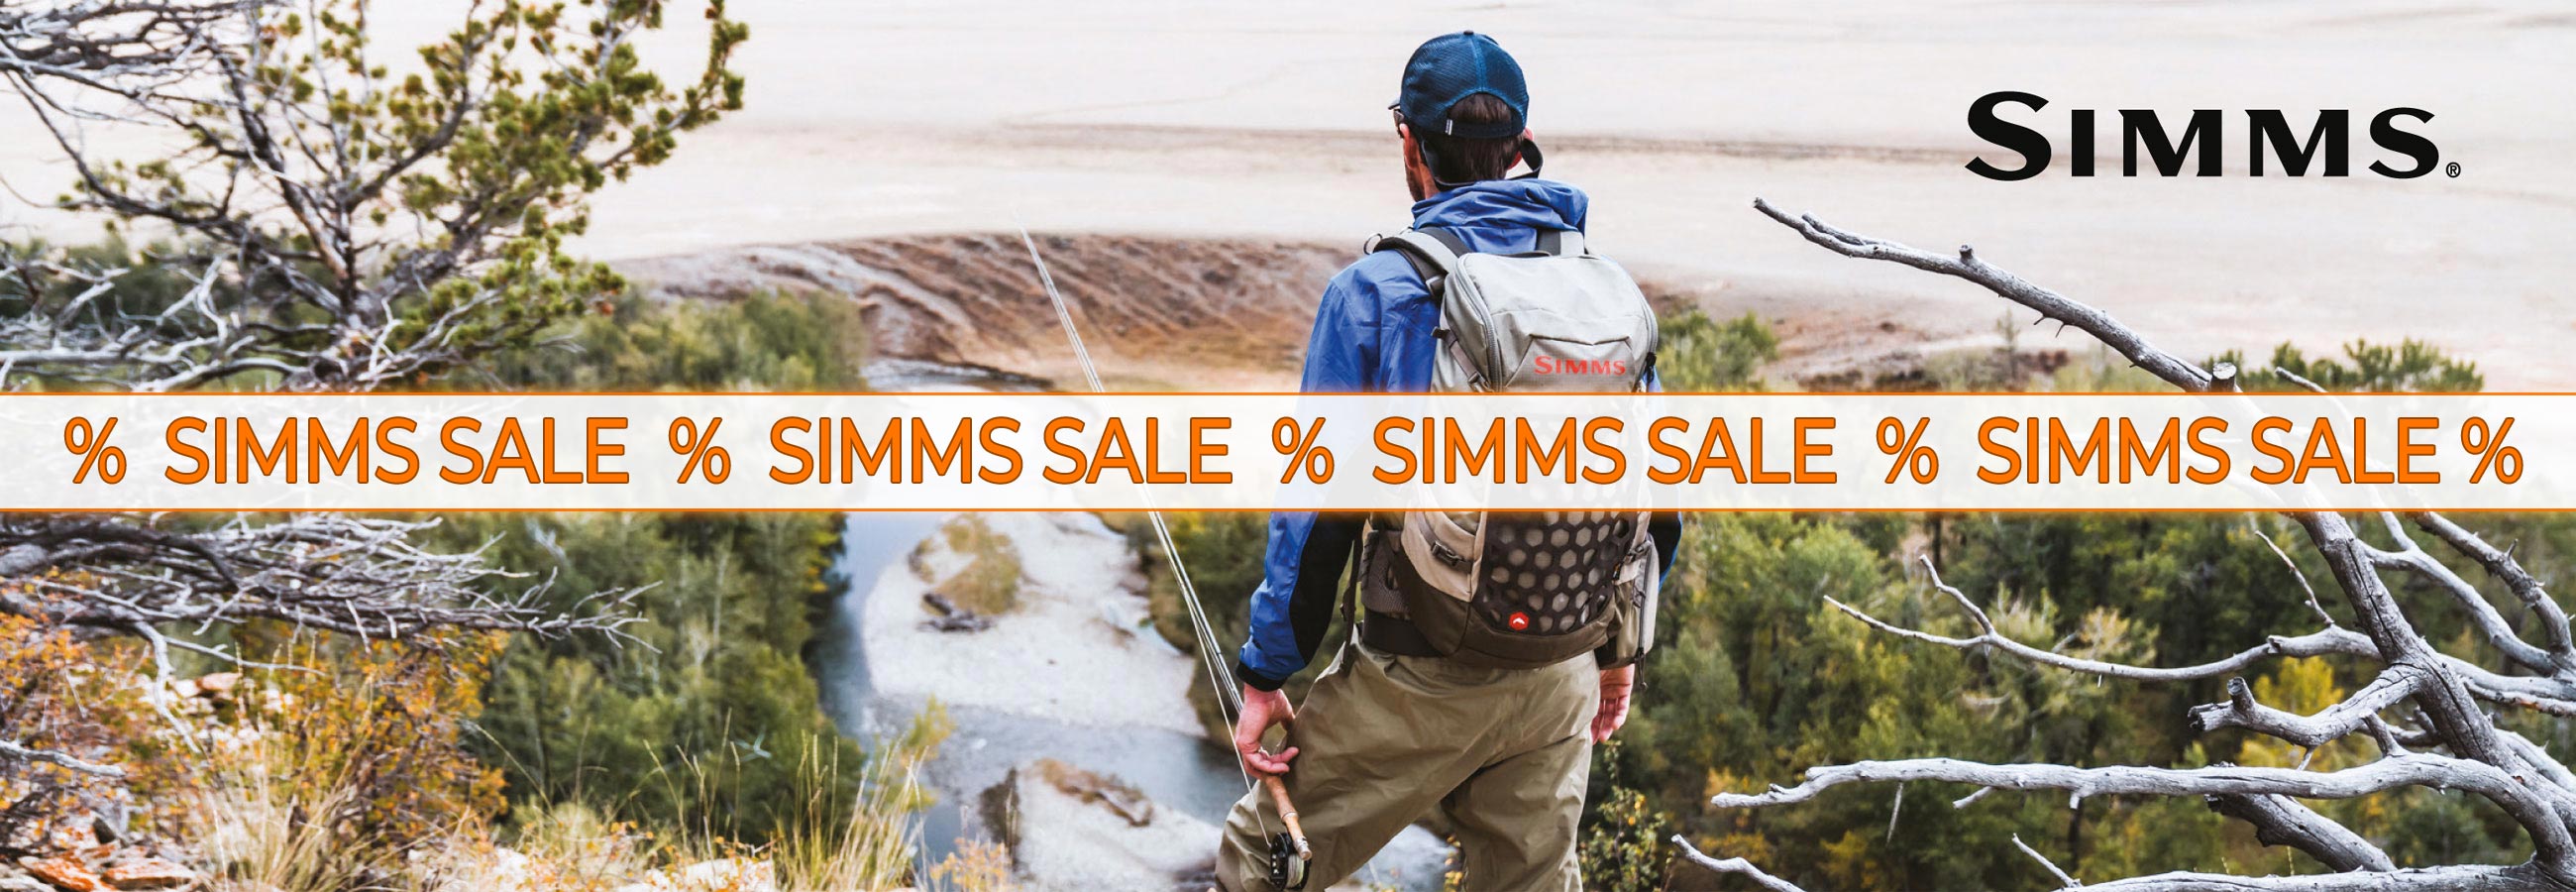 SIMMS SALE - Waders, Jackets, Boots, Shirts, Caps and much more at bargain prices!